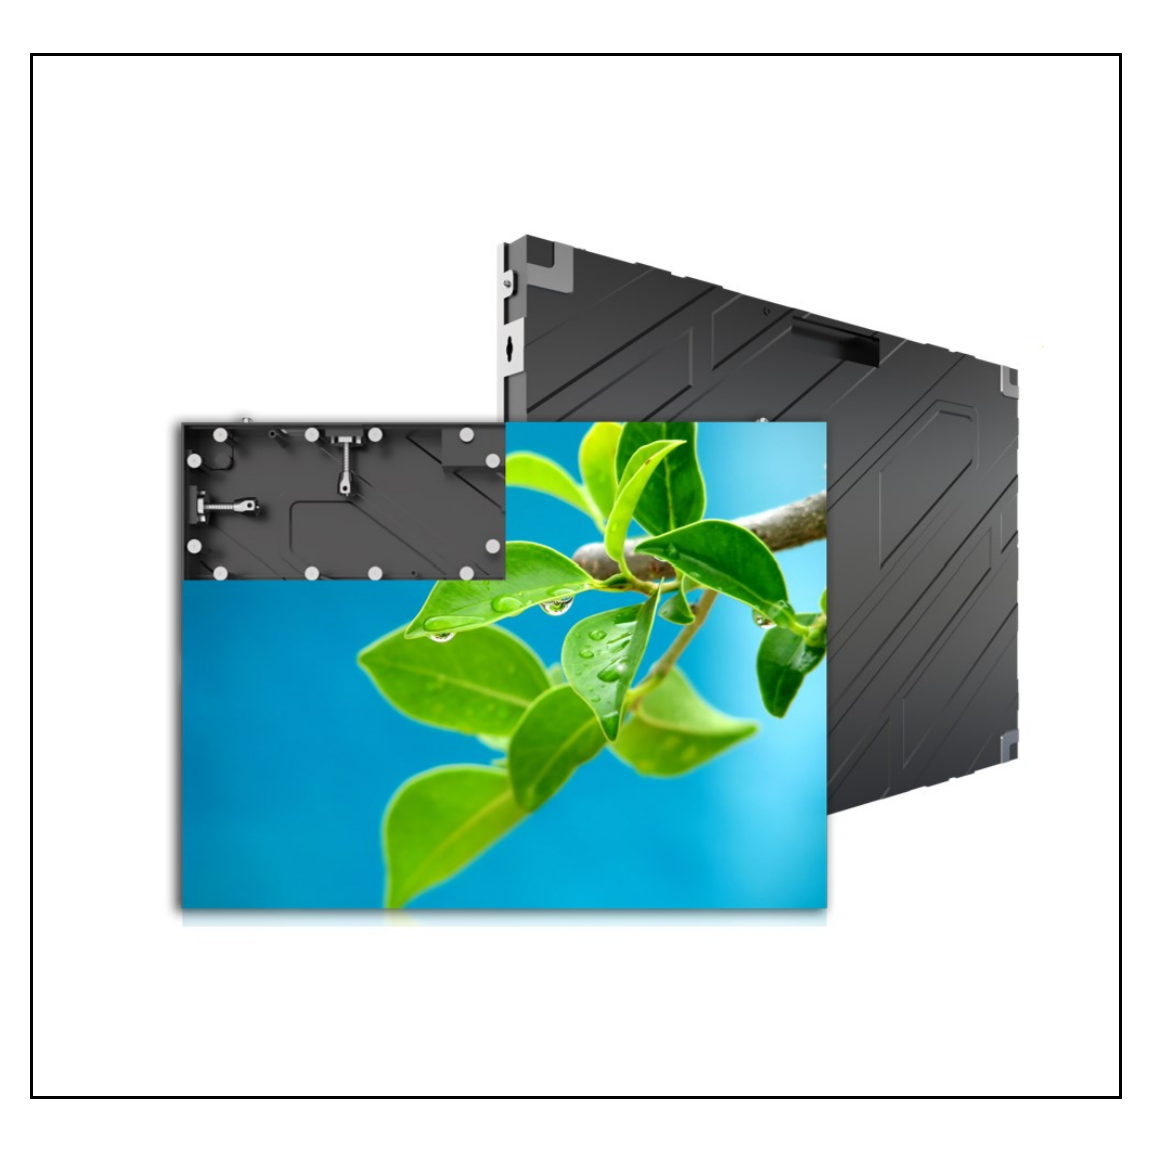 Indoor Fine-Pitch Ultra-Light Ultra-Thin High-Definition Seamless Cost-Effective LED Display Screen Featured Image